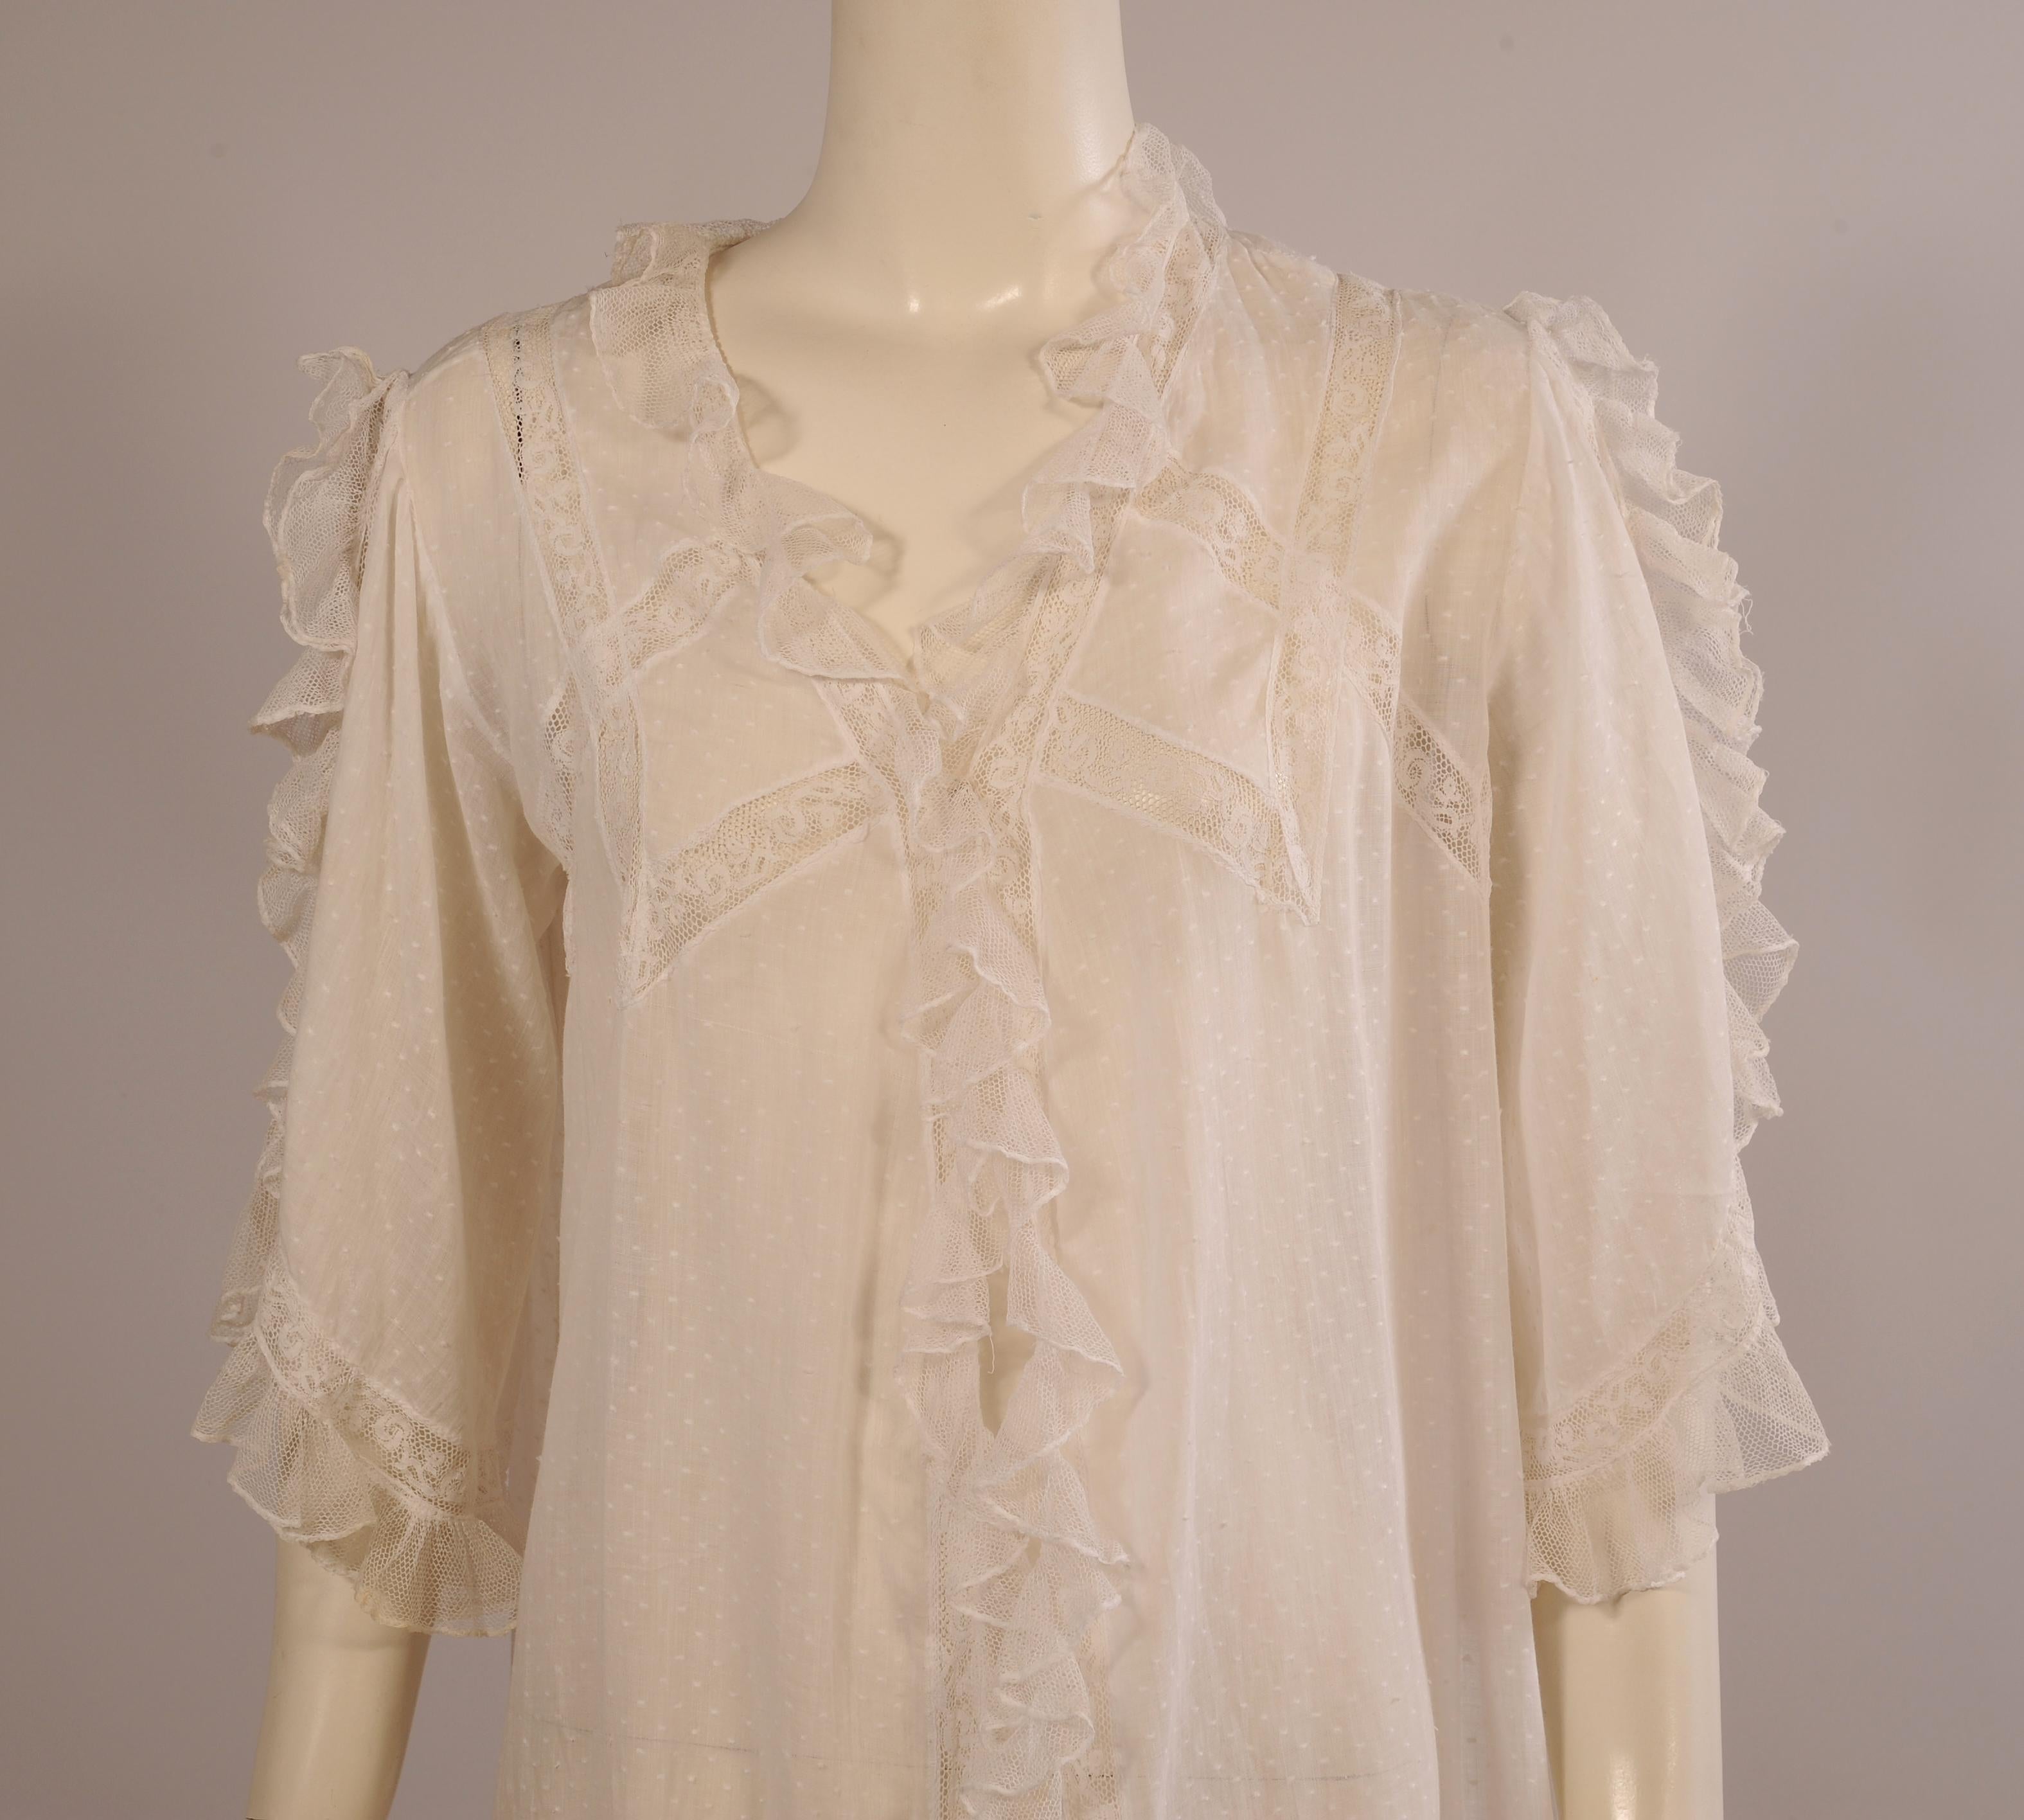 Slip into this feminine lace edged white dotted Swiss peignoir for a little vintage luxury. There is one hook and eye closure at the bust and the lace trimmed edges curve down toward the lacy hemline. The sleeves are full and repeat the lace